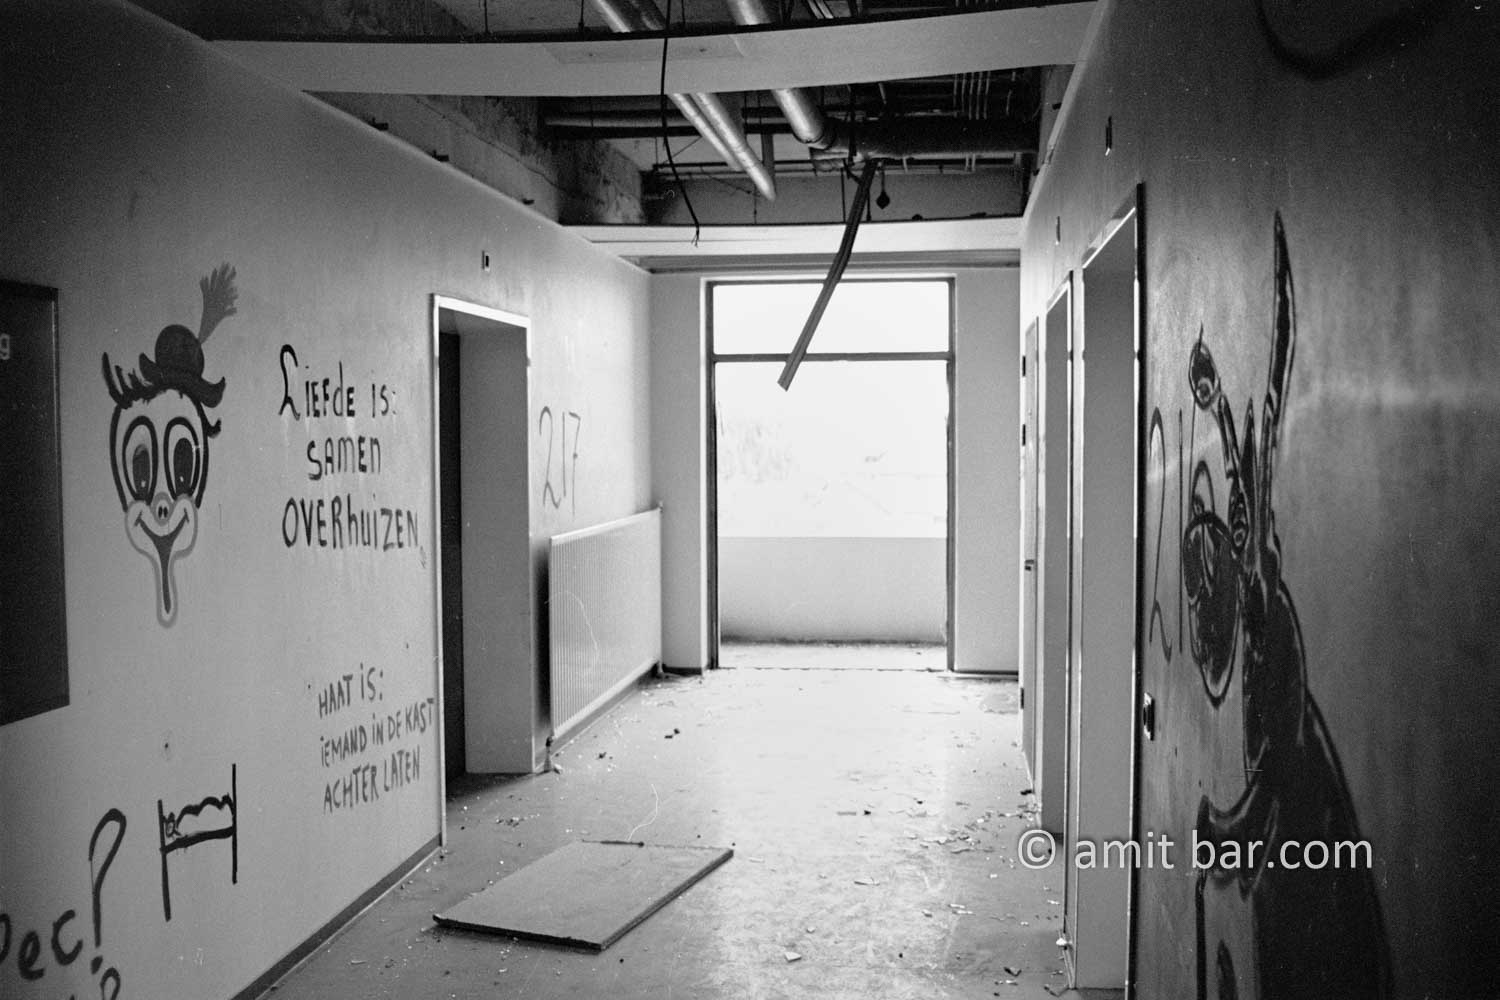 Love is...: Last notifications of staff and patients on the walls of a corridor in abandoned hospital before the demolition. Doetinchem, The Netherlands